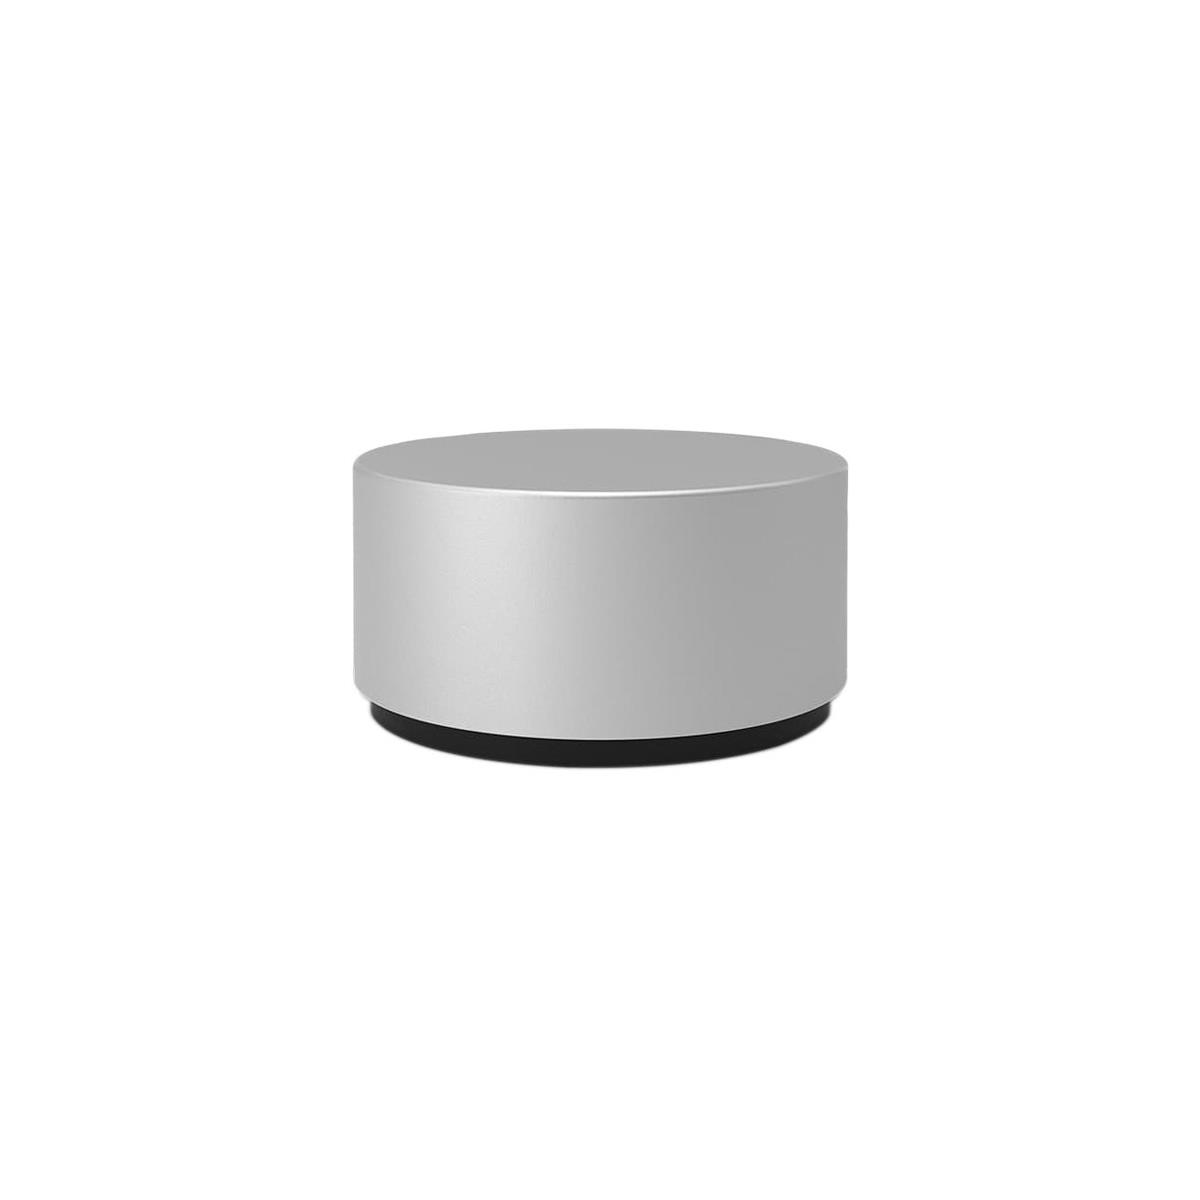 Image of Microsoft Surface Dial